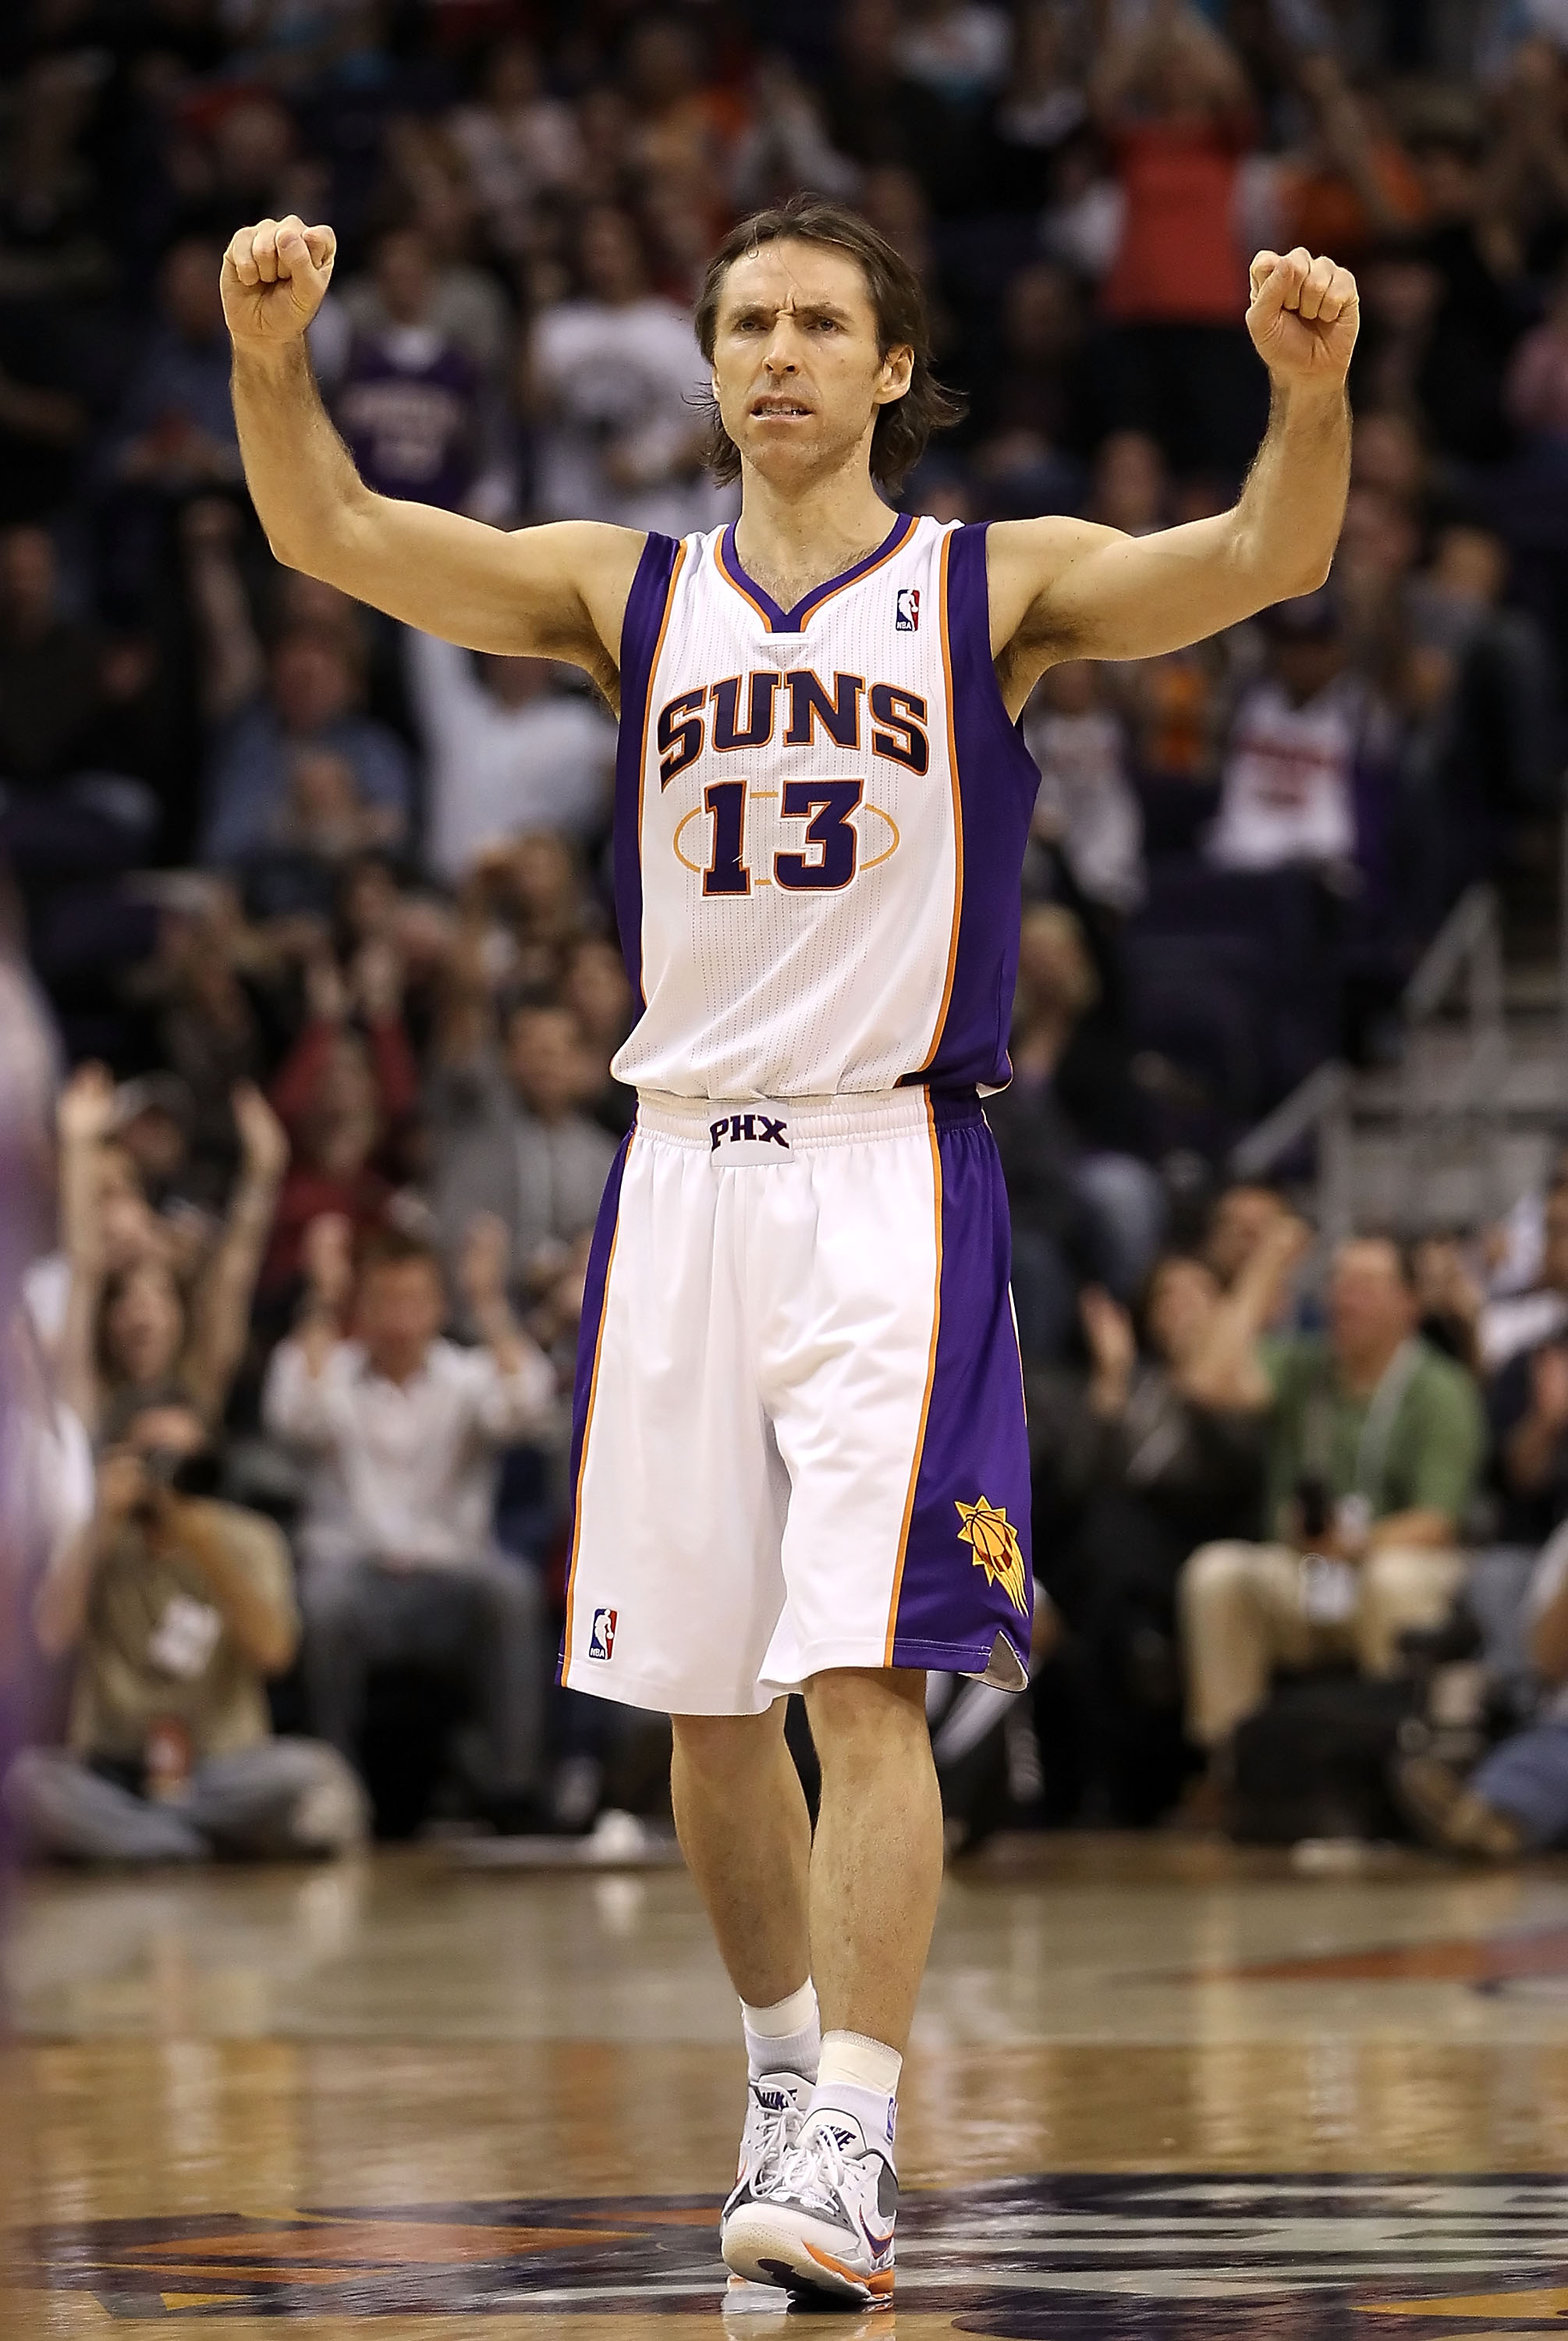 PHOENIX - DECEMBER 03:  Steve Nash #13 of the Phoenix Suns reacts after scoring against the Indiana Pacers during the NBA game at US Airways Center on December 3, 2010 in Phoenix, Arizona.  The Suns defeated the Pacers 105-97.  NOTE TO USER: User expressl